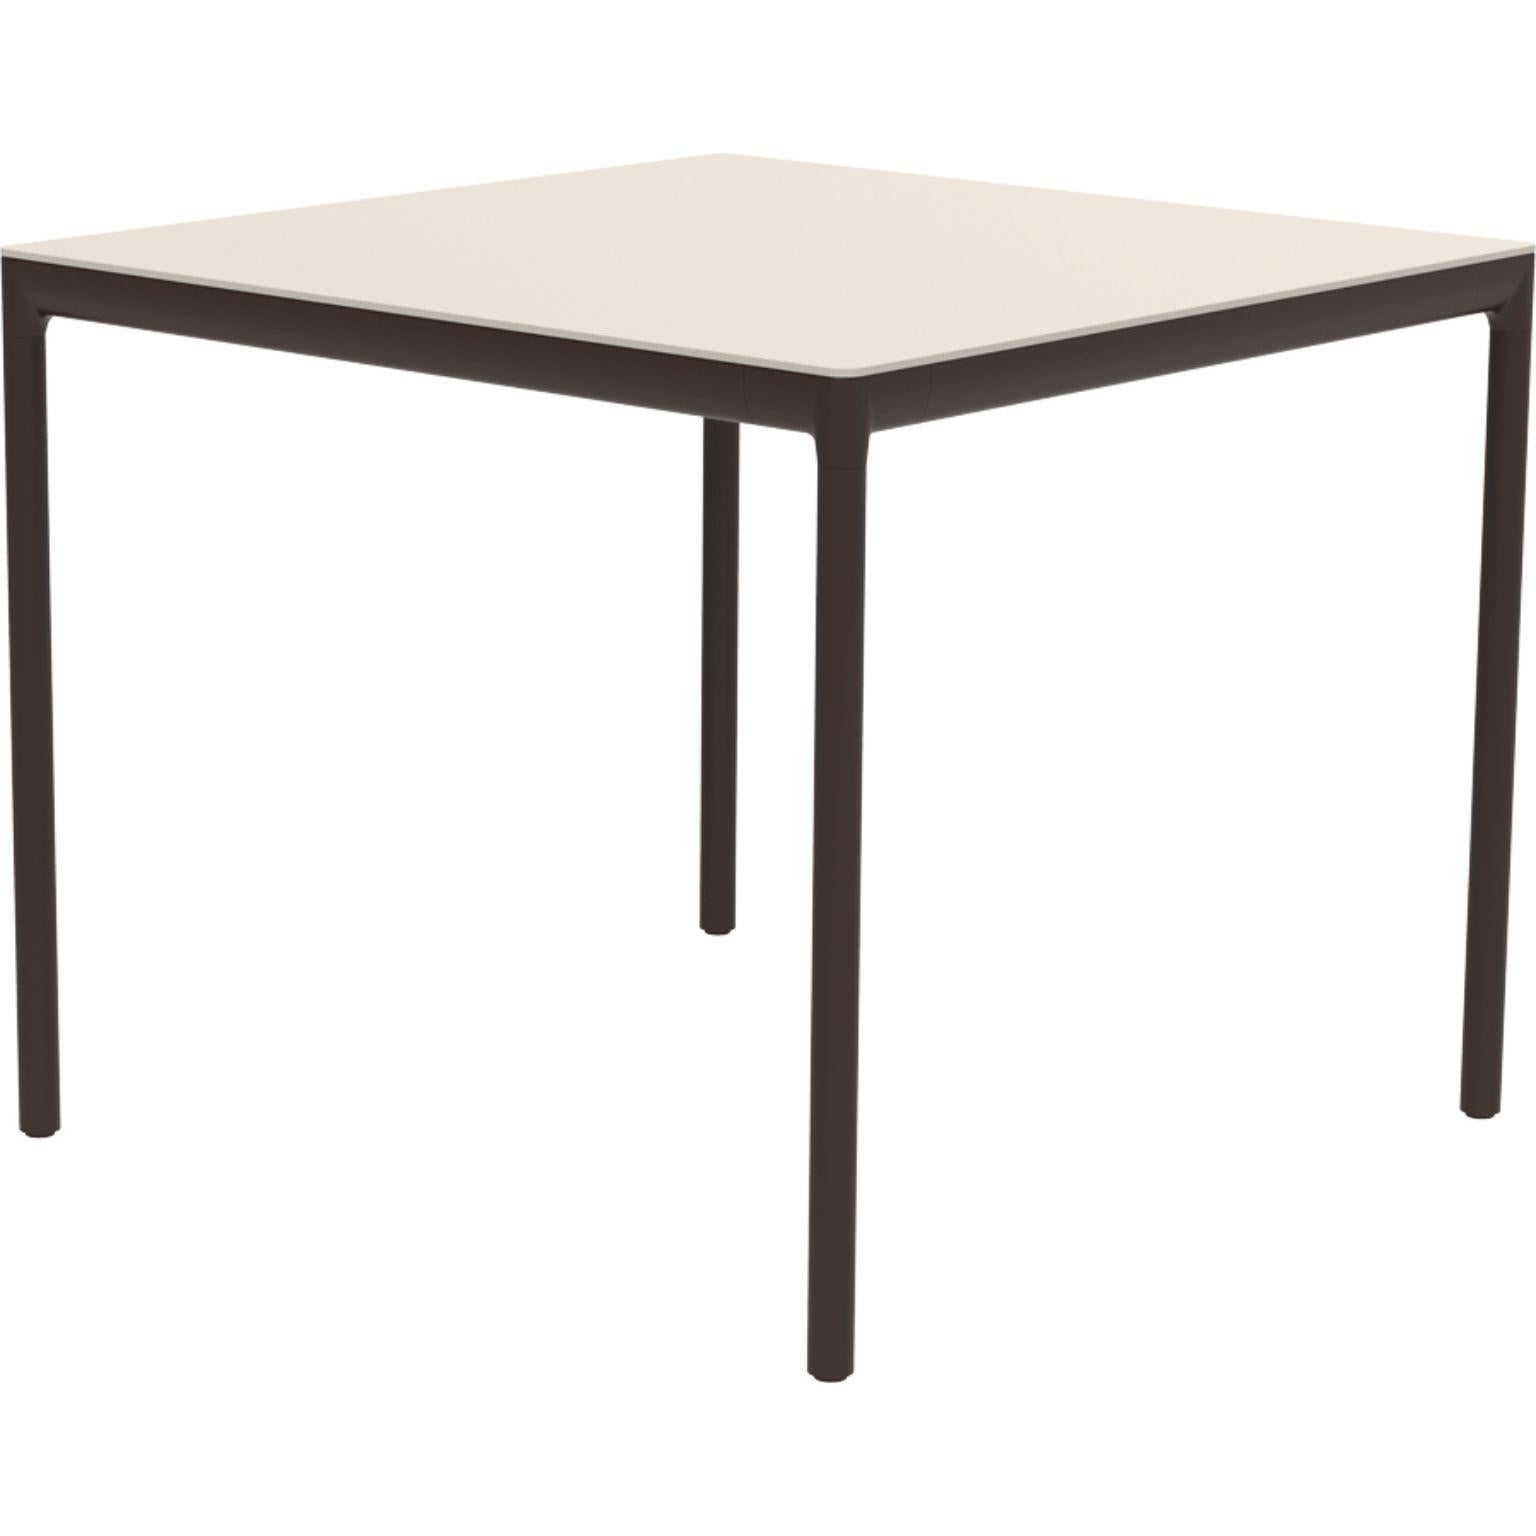 Ribbons chocolate 90 table by MOWEE
Dimensions: D90 x W90 x H75 cm.
Material: Aluminum and HPL top.
Weight: 16 kg.
Also available in different colors and finishes. (HPL Black Edge or Neolith top).

An unmistakable collection for its beauty and